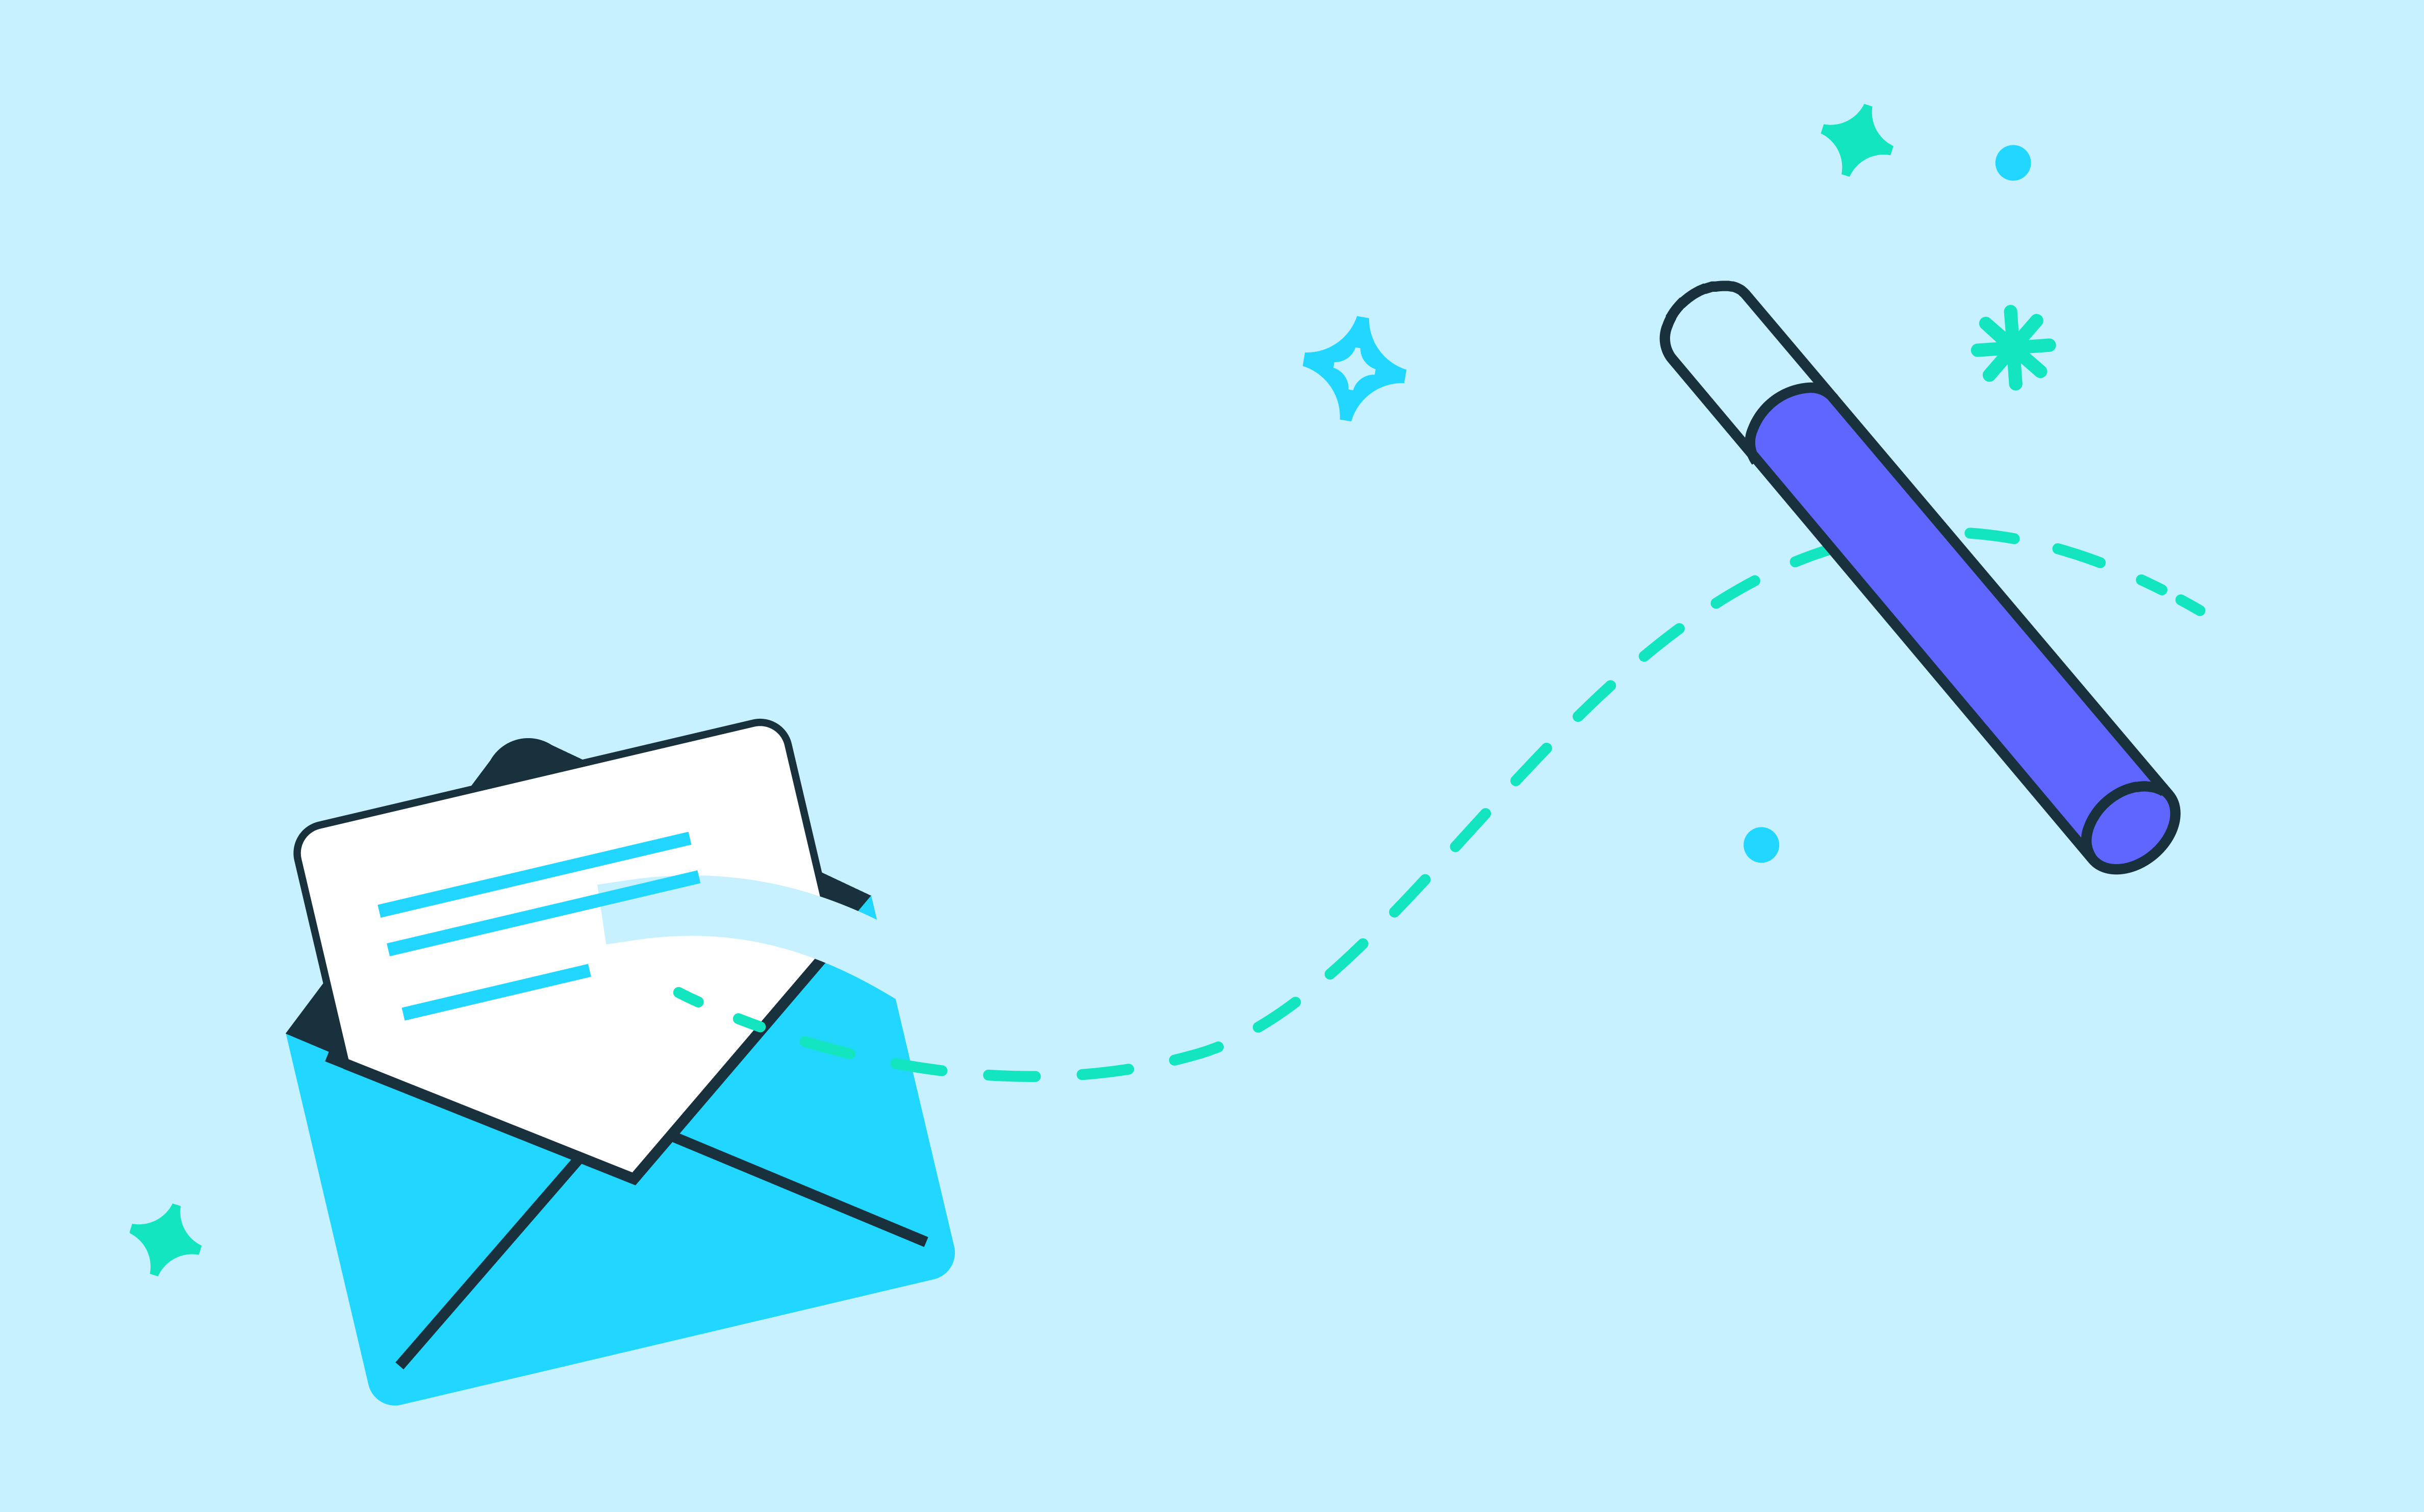 An image of an envelope with a letter in it, activated by a magic wand, representing an email magic link